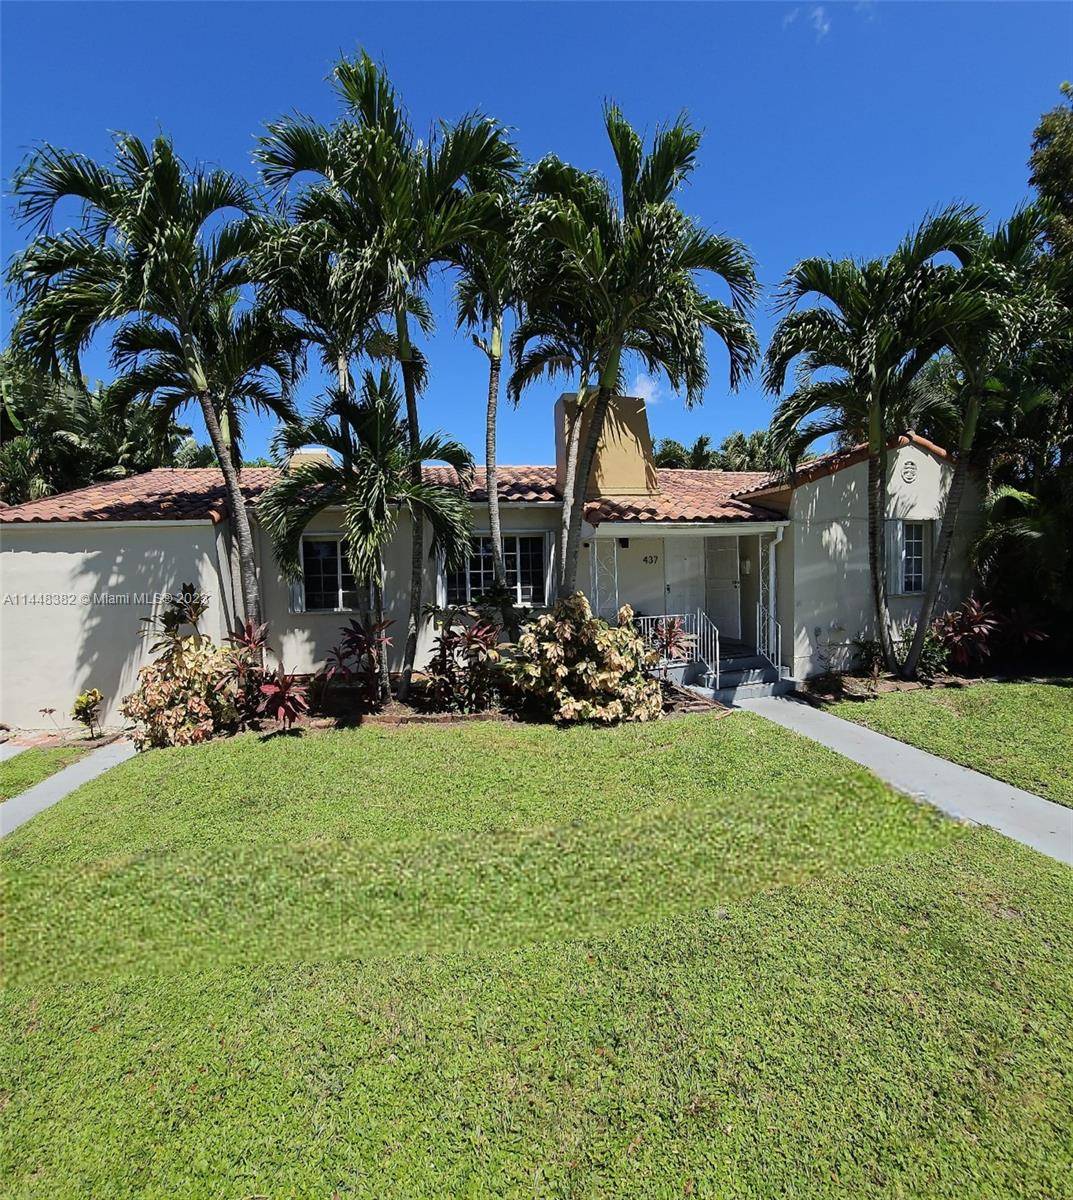 Welcome to this turnkey property in Miami Shores.